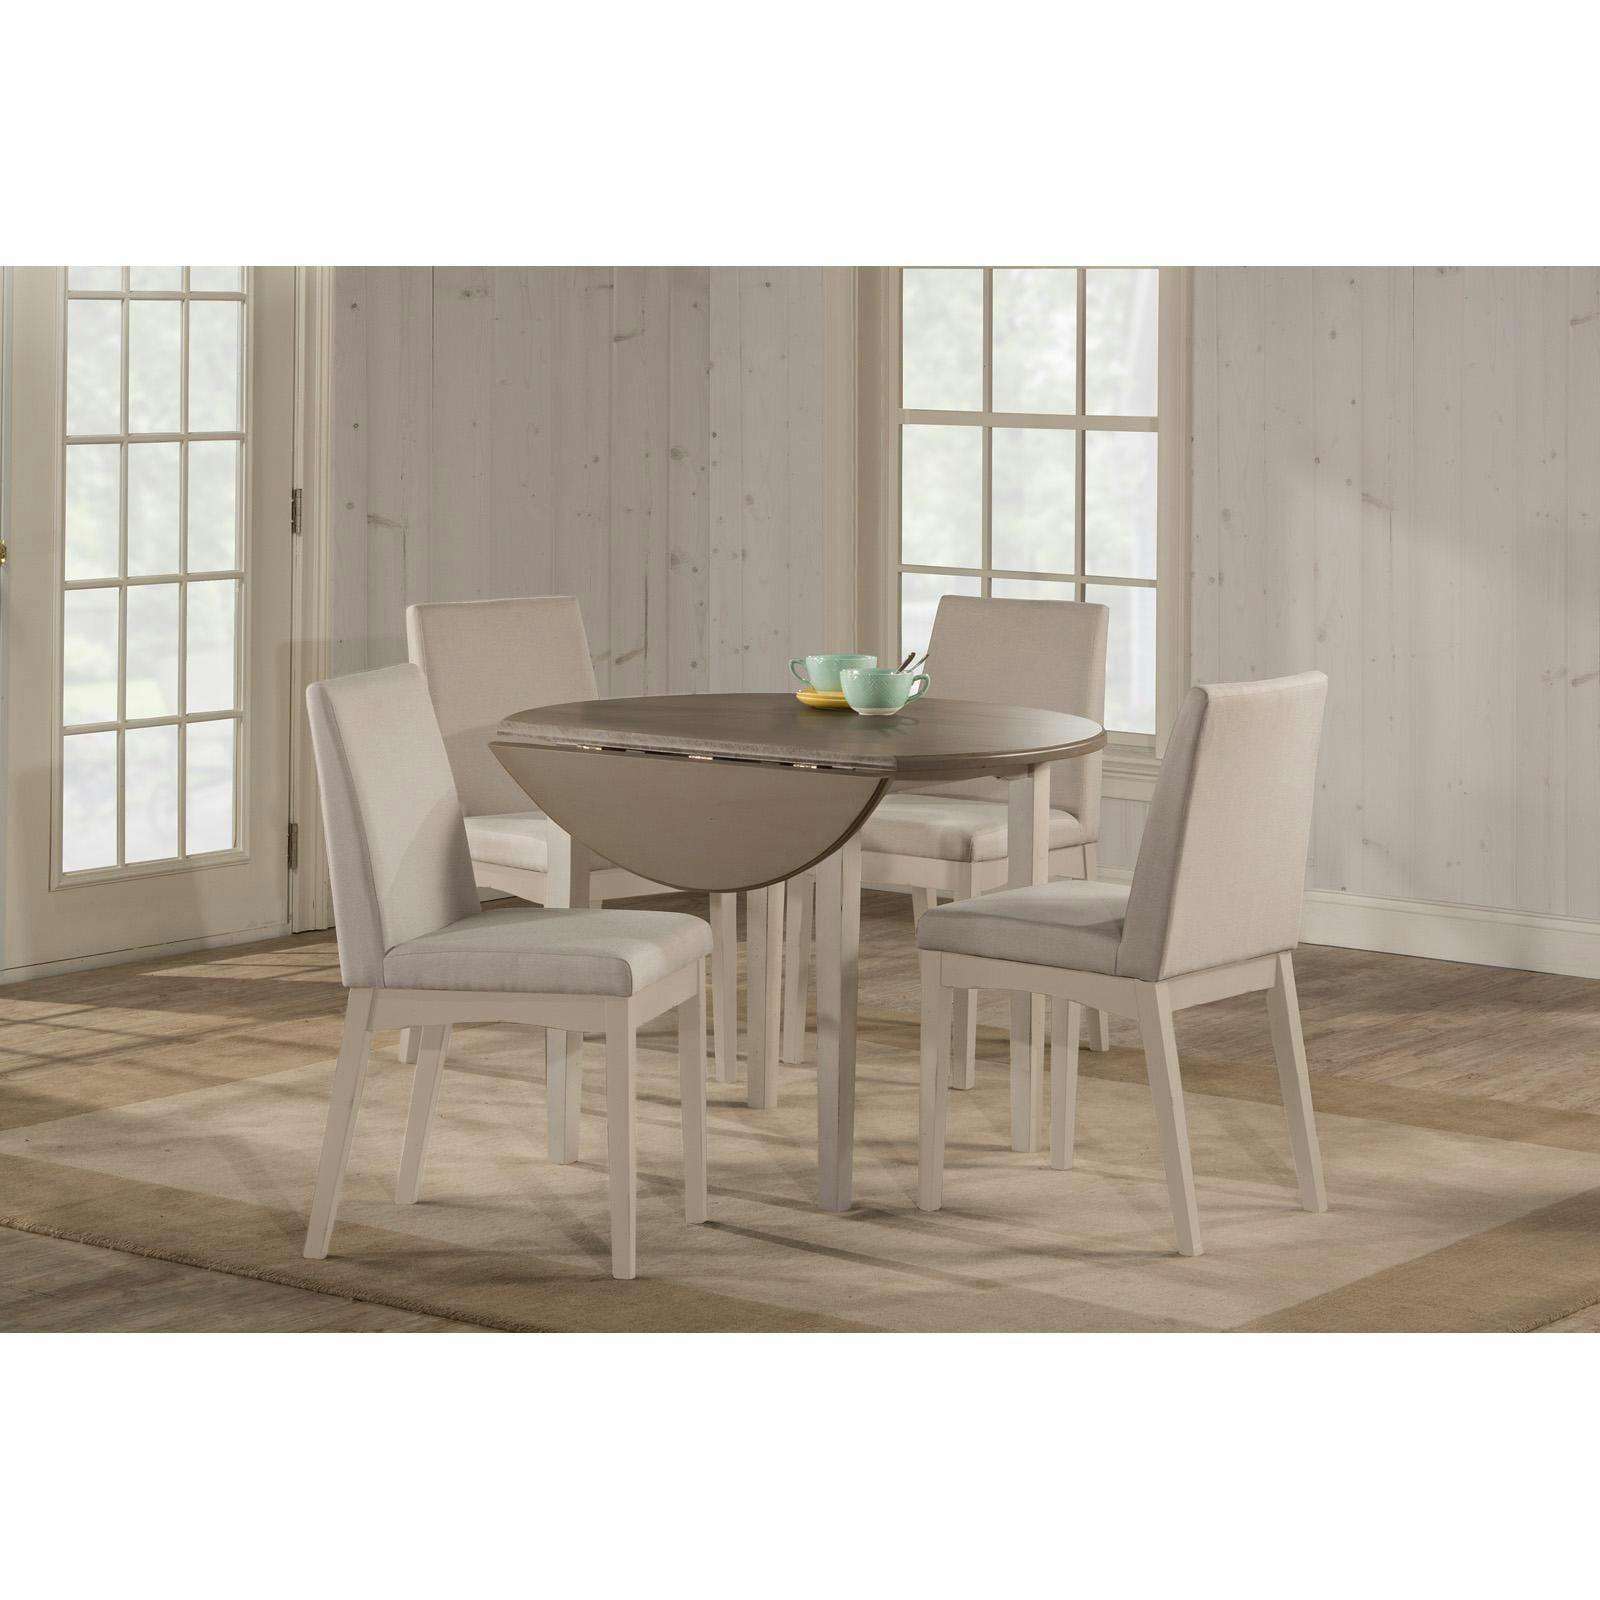 Clarion Farmhouse Round Drop-Leaf Dining Table in Sea White and Distressed Gray